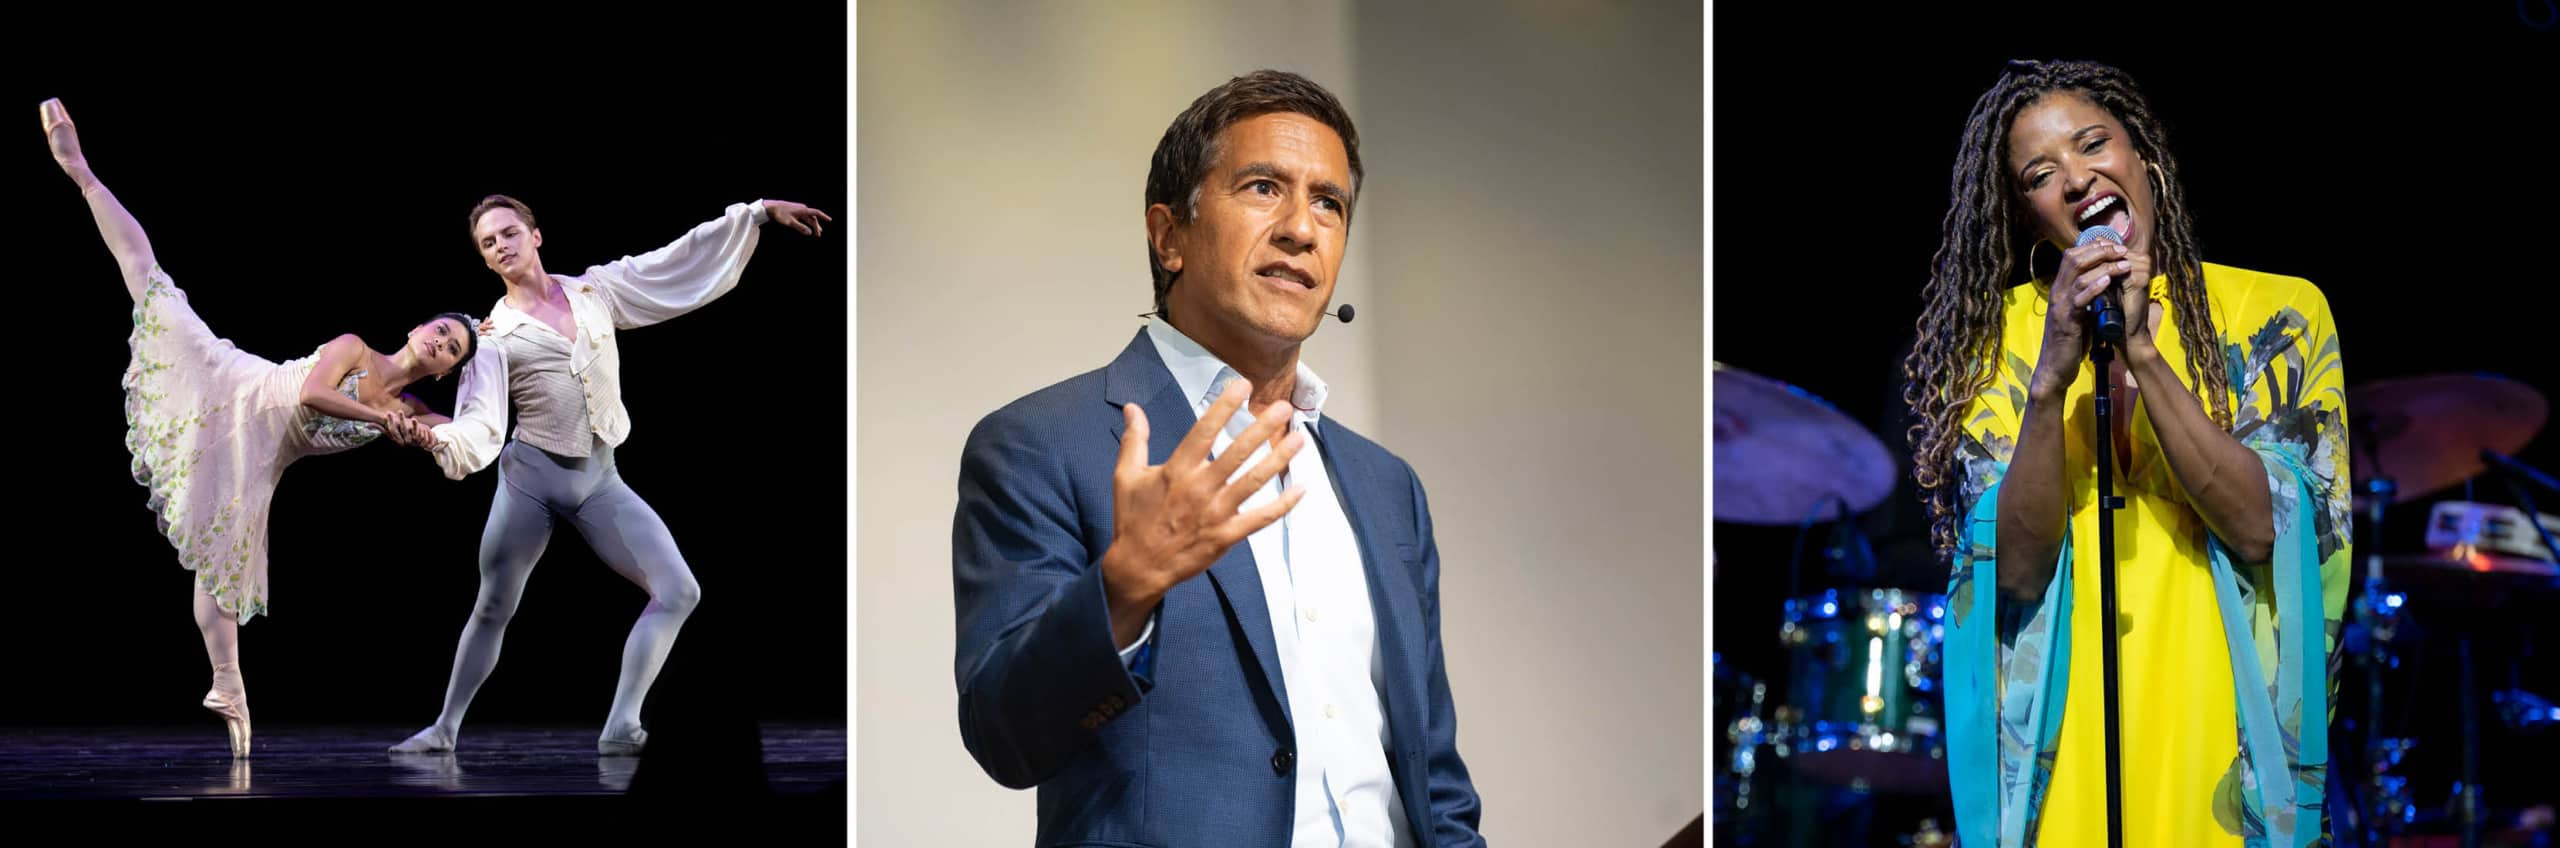 Ballet dancers, Sanjay Gupta giving a lecture and Renee Elise Goldsberry singing